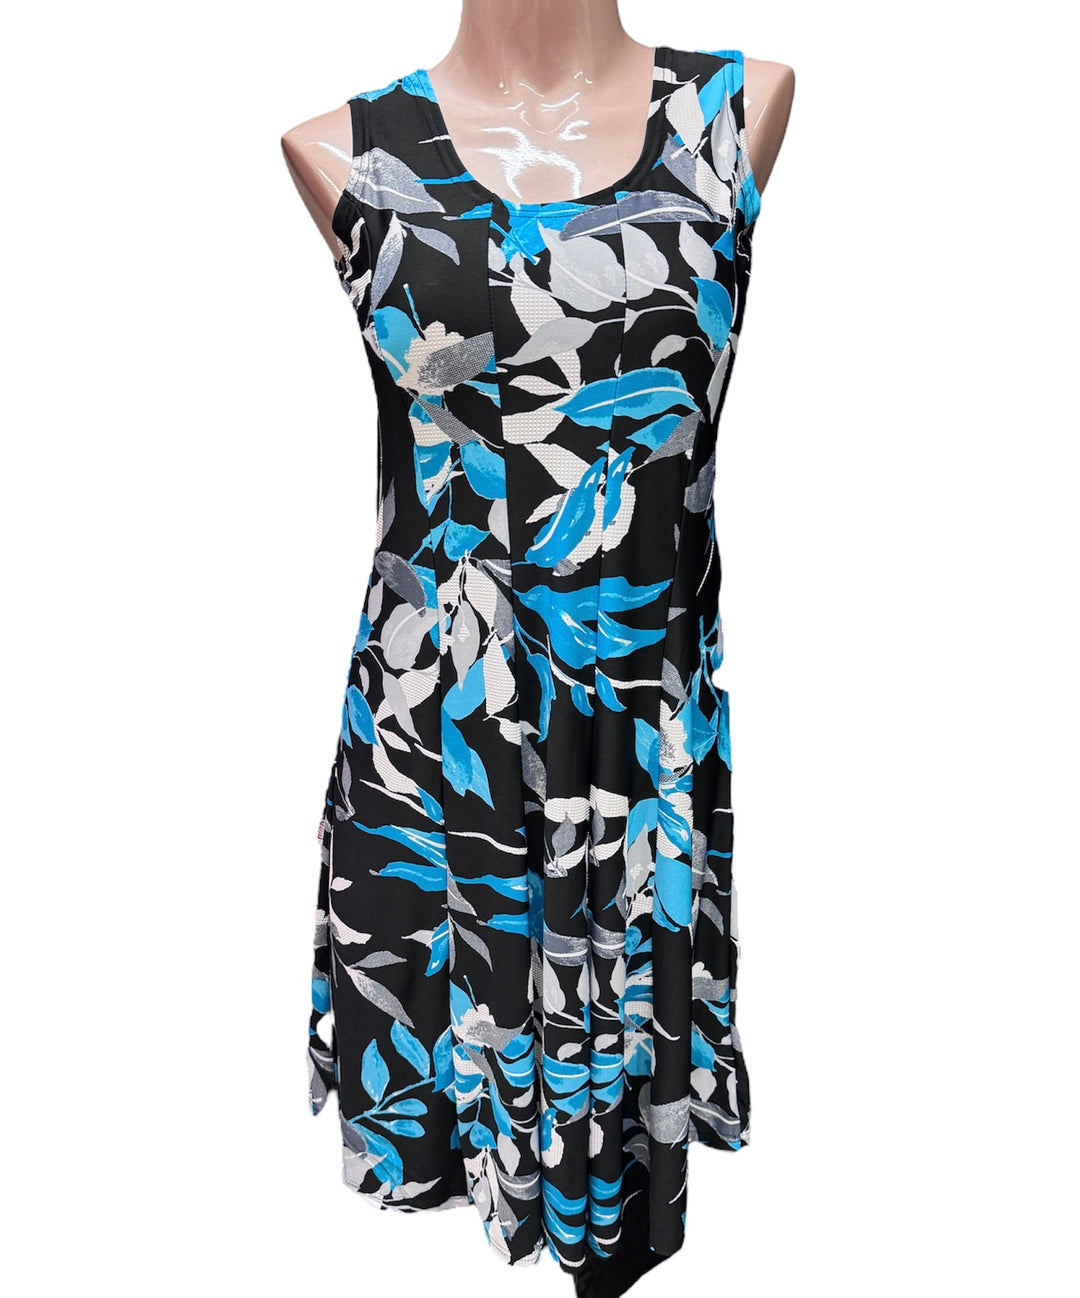 Fit & Flare Dress - Turquoise Floral